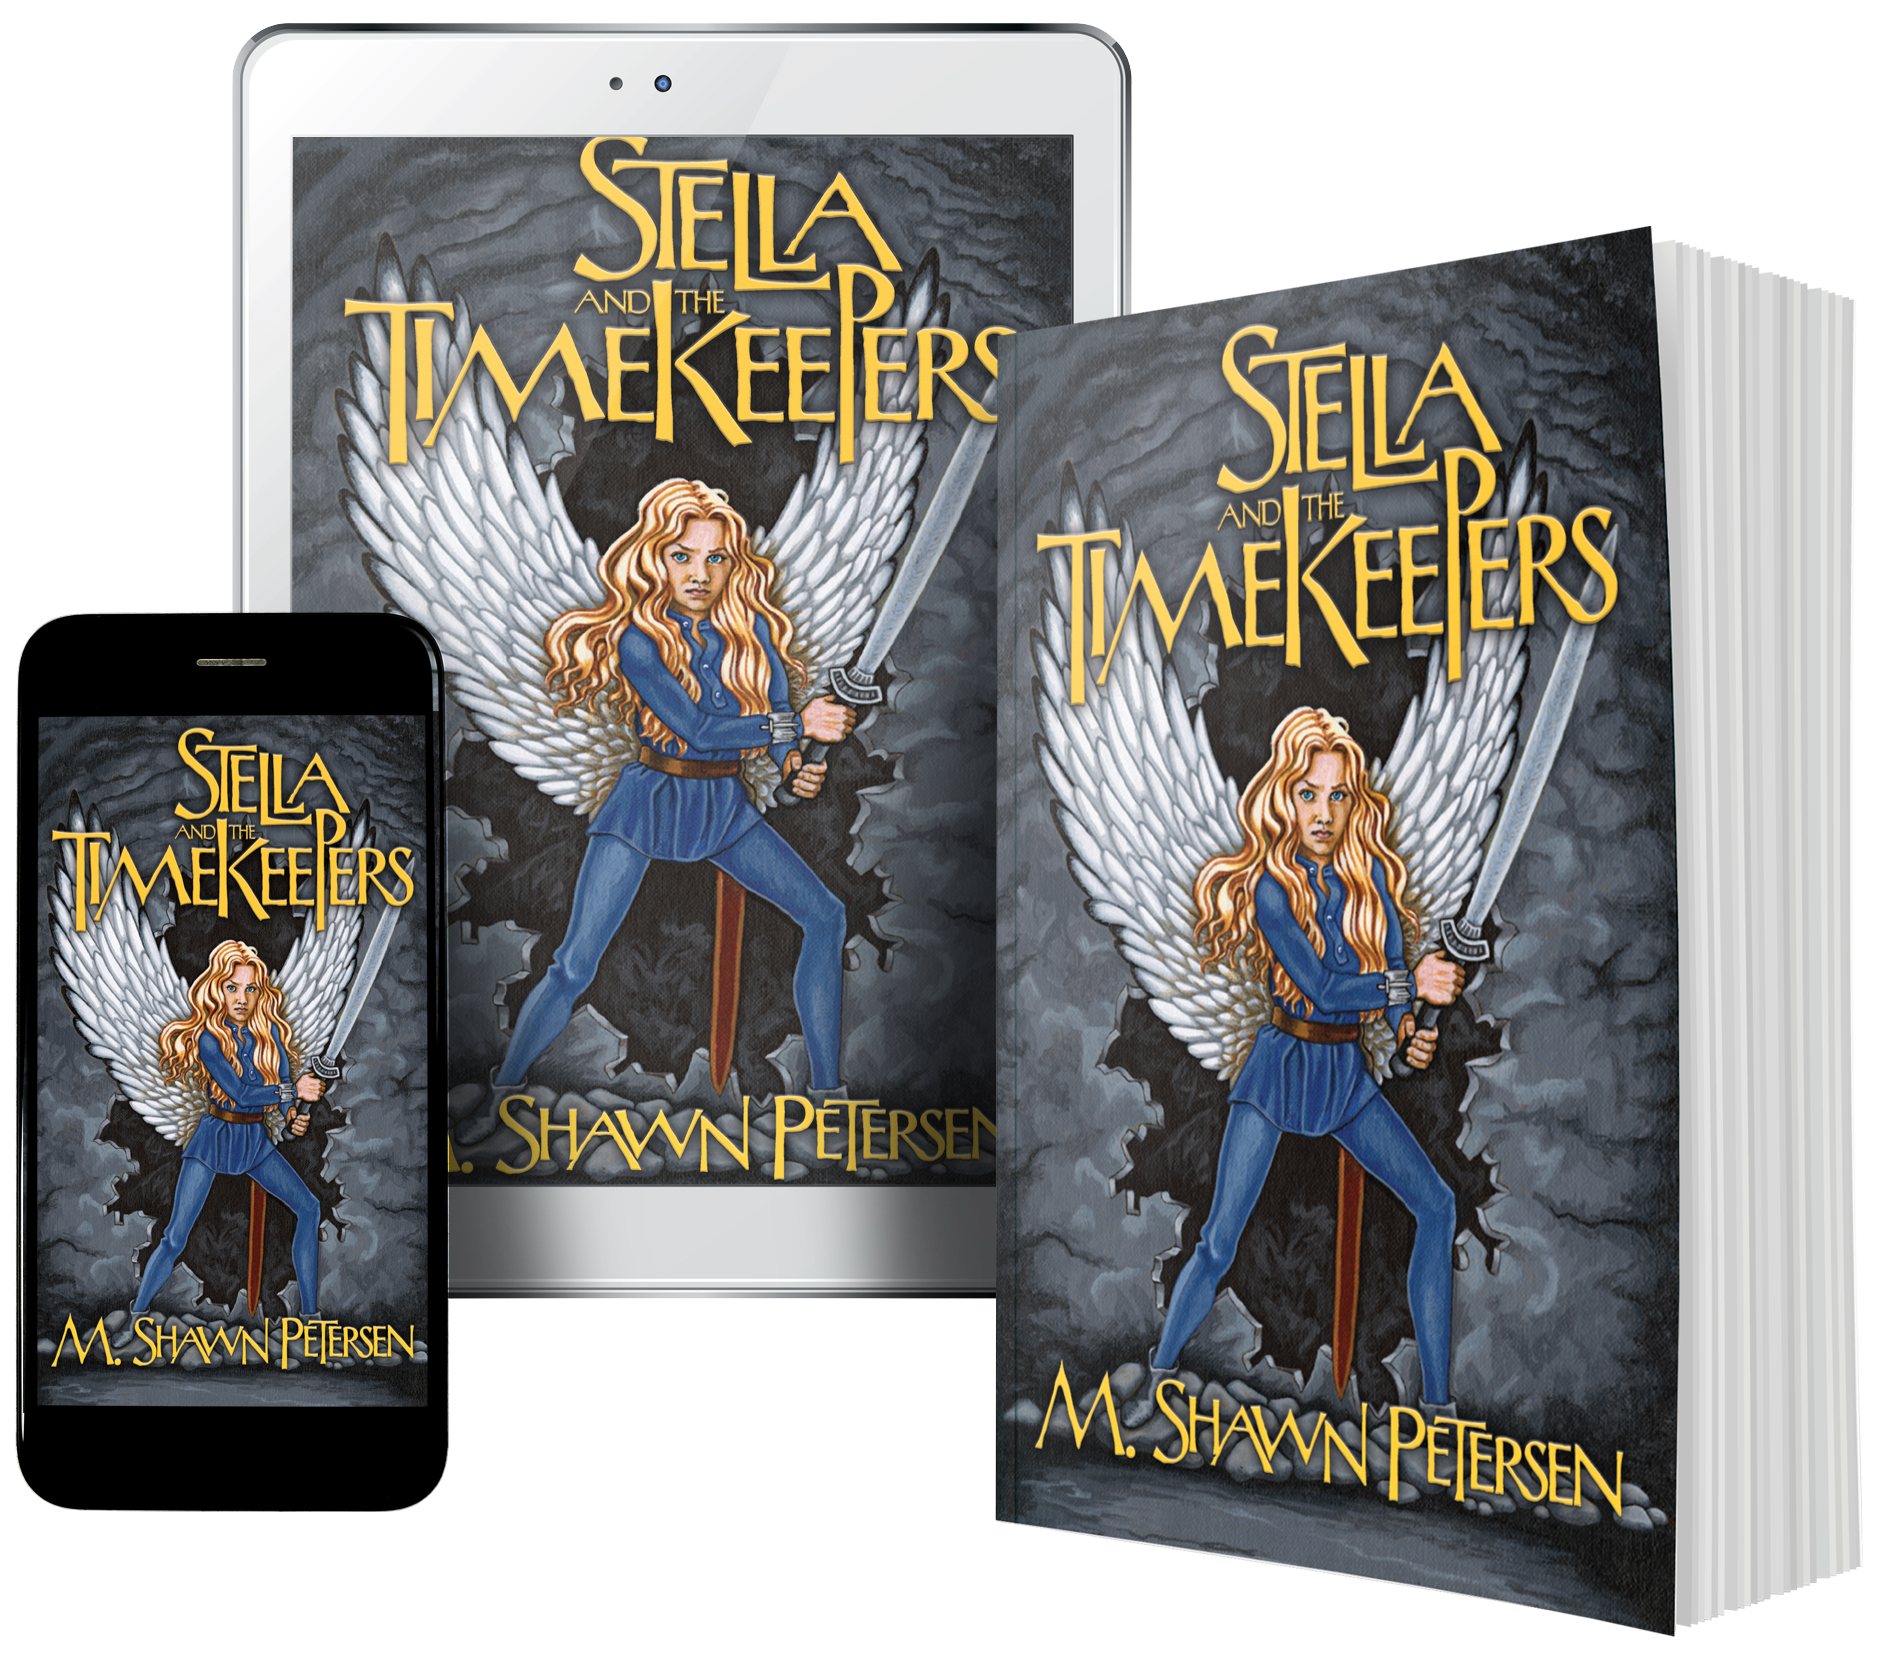 Stella and the Timekeepers by M. Shawn Petersen